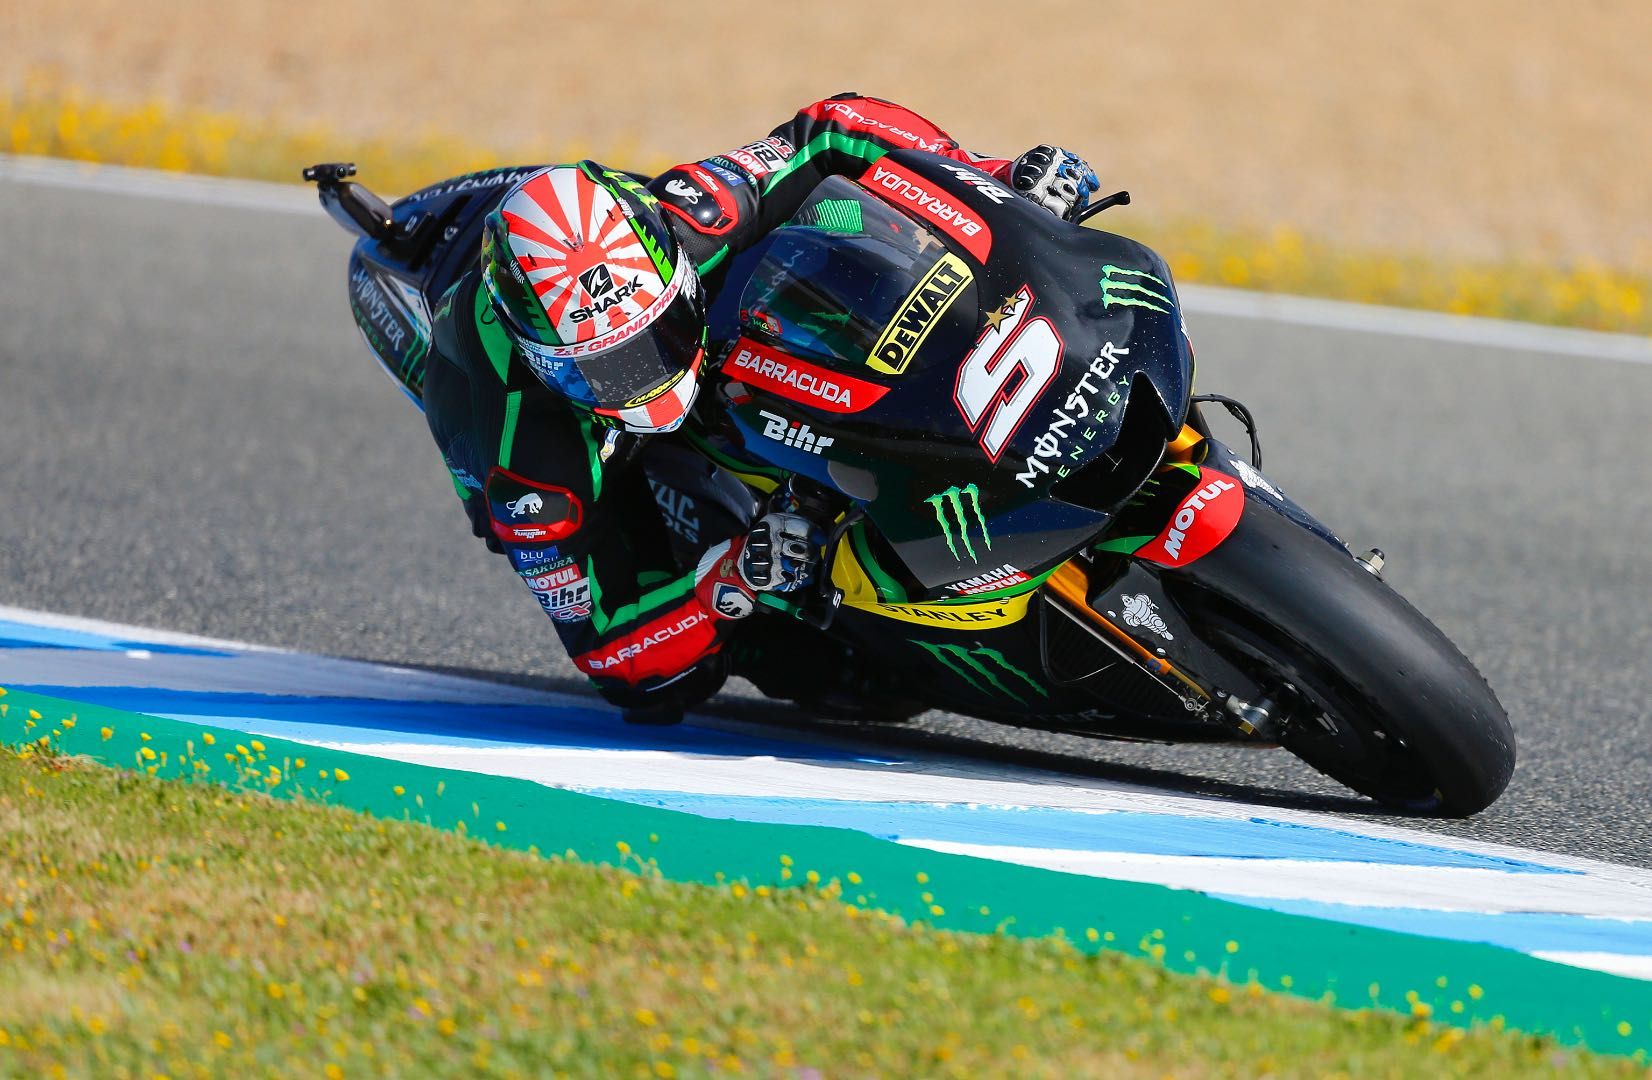 Zarco displayed some truly great racing today at Jerez